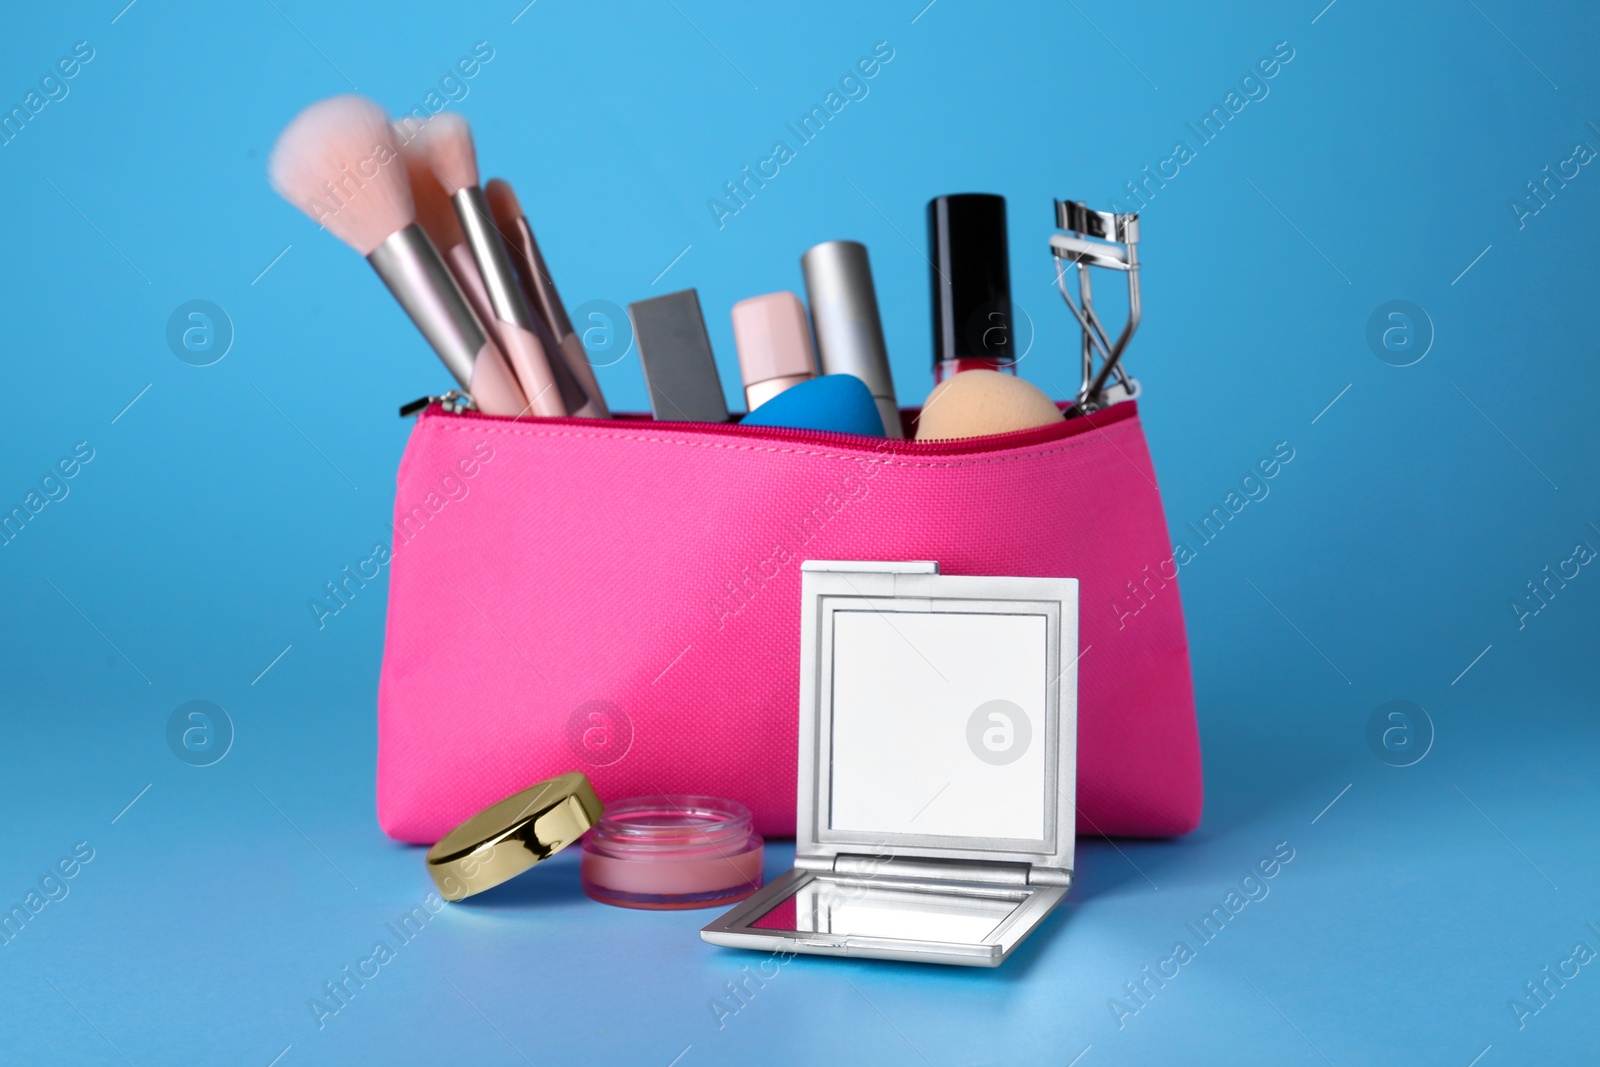 Photo of Stylish pocket mirror and cosmetic bag with makeup products on light blue background